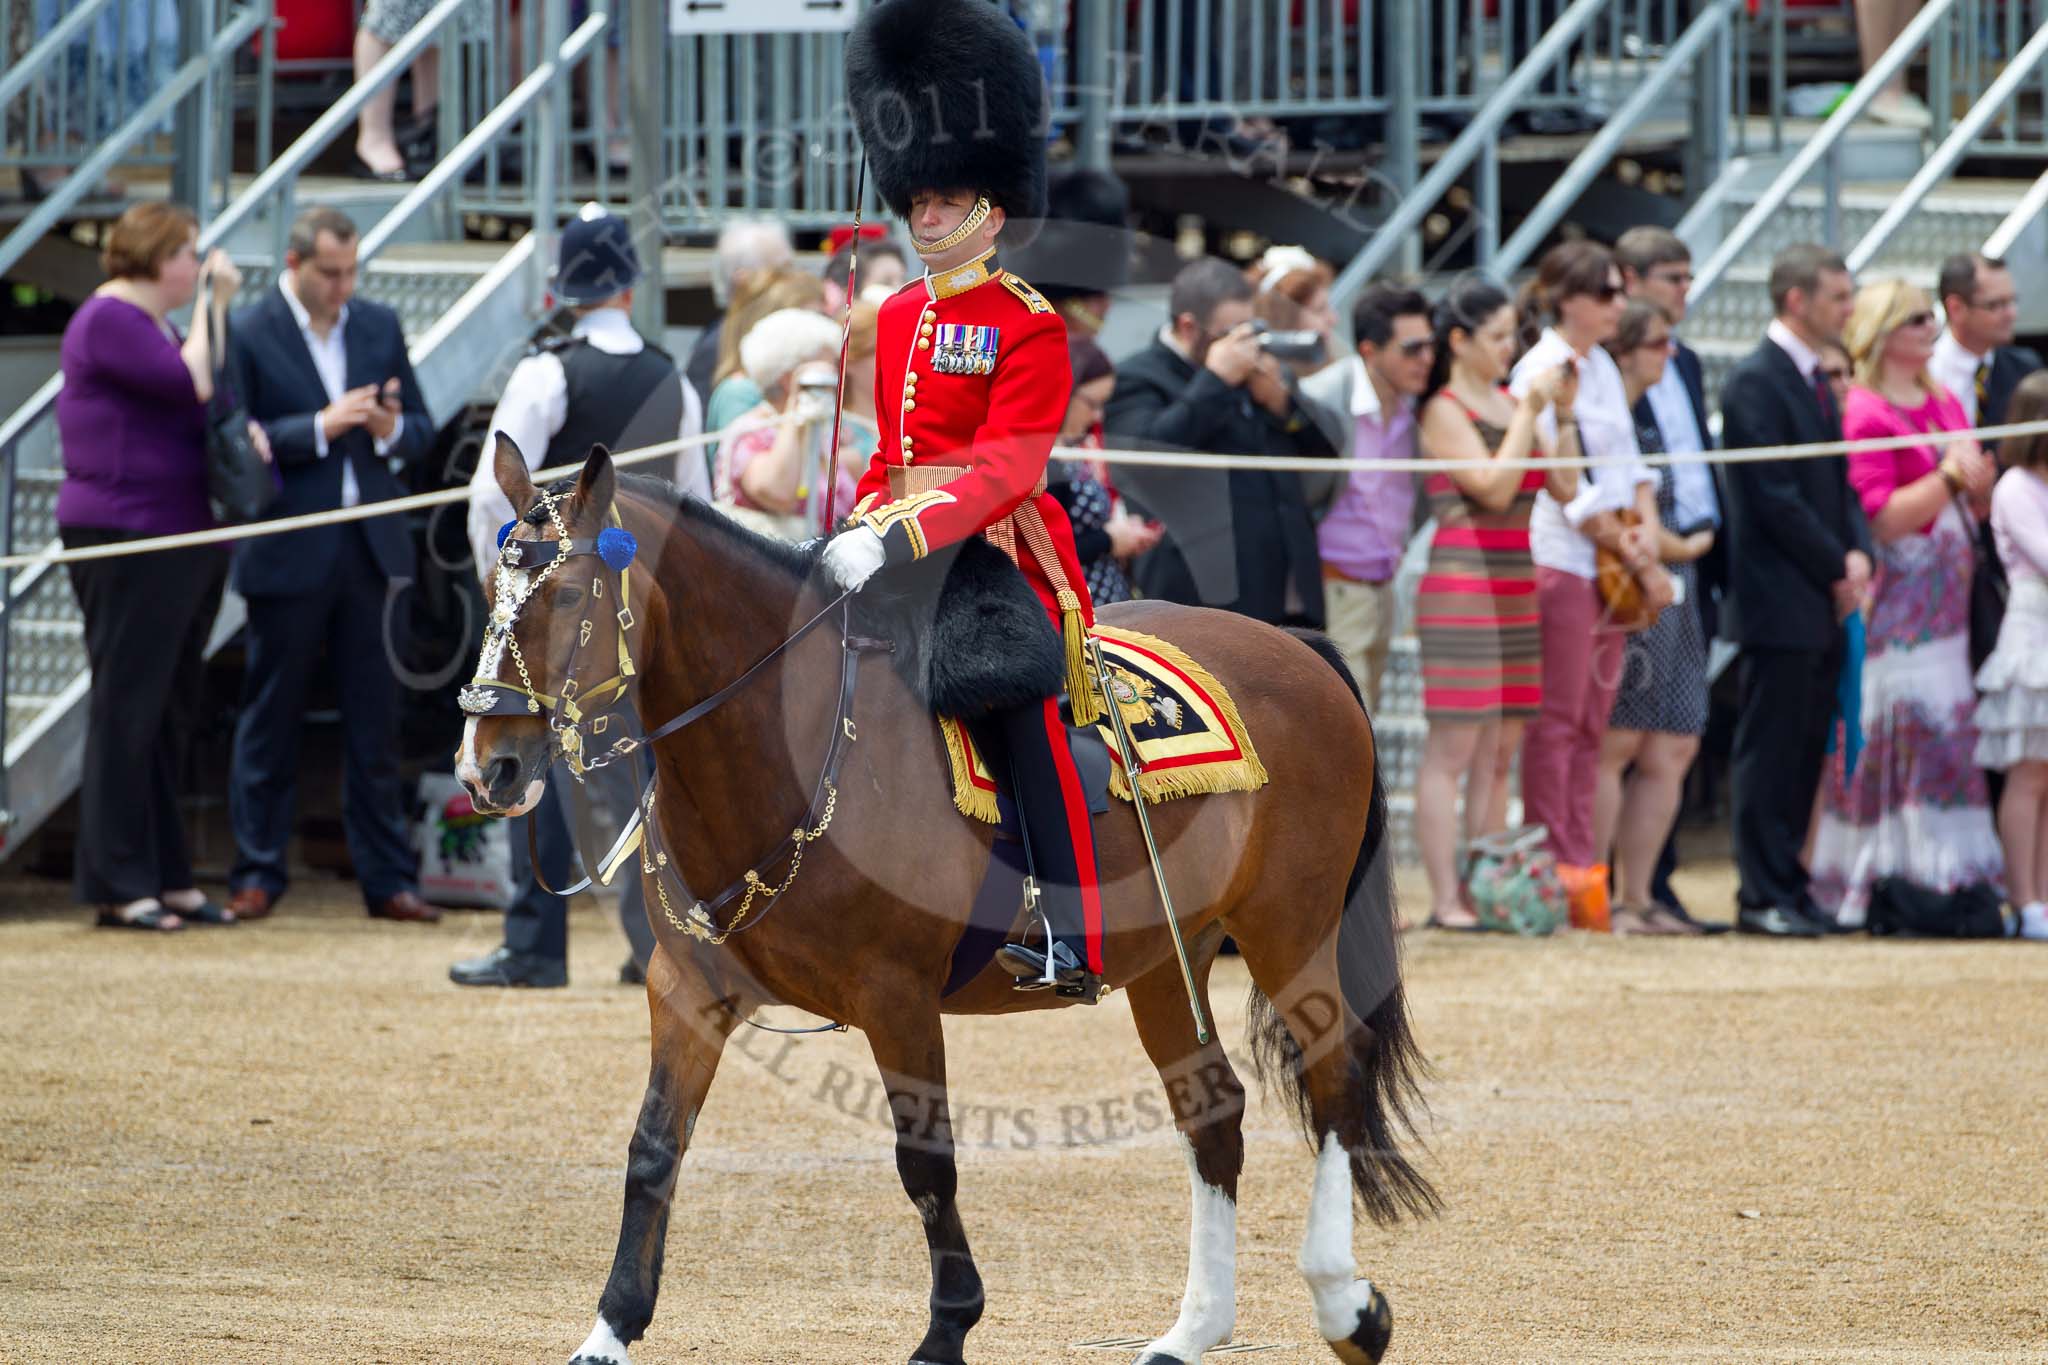 The Colonel's Review 2011: The Field Officer, Lieutenant Colonel L P M Jopp, riding 'Burniston', during the March Past..
Horse Guards Parade, Westminster,
London SW1,

United Kingdom,
on 04 June 2011 at 11:32, image #158